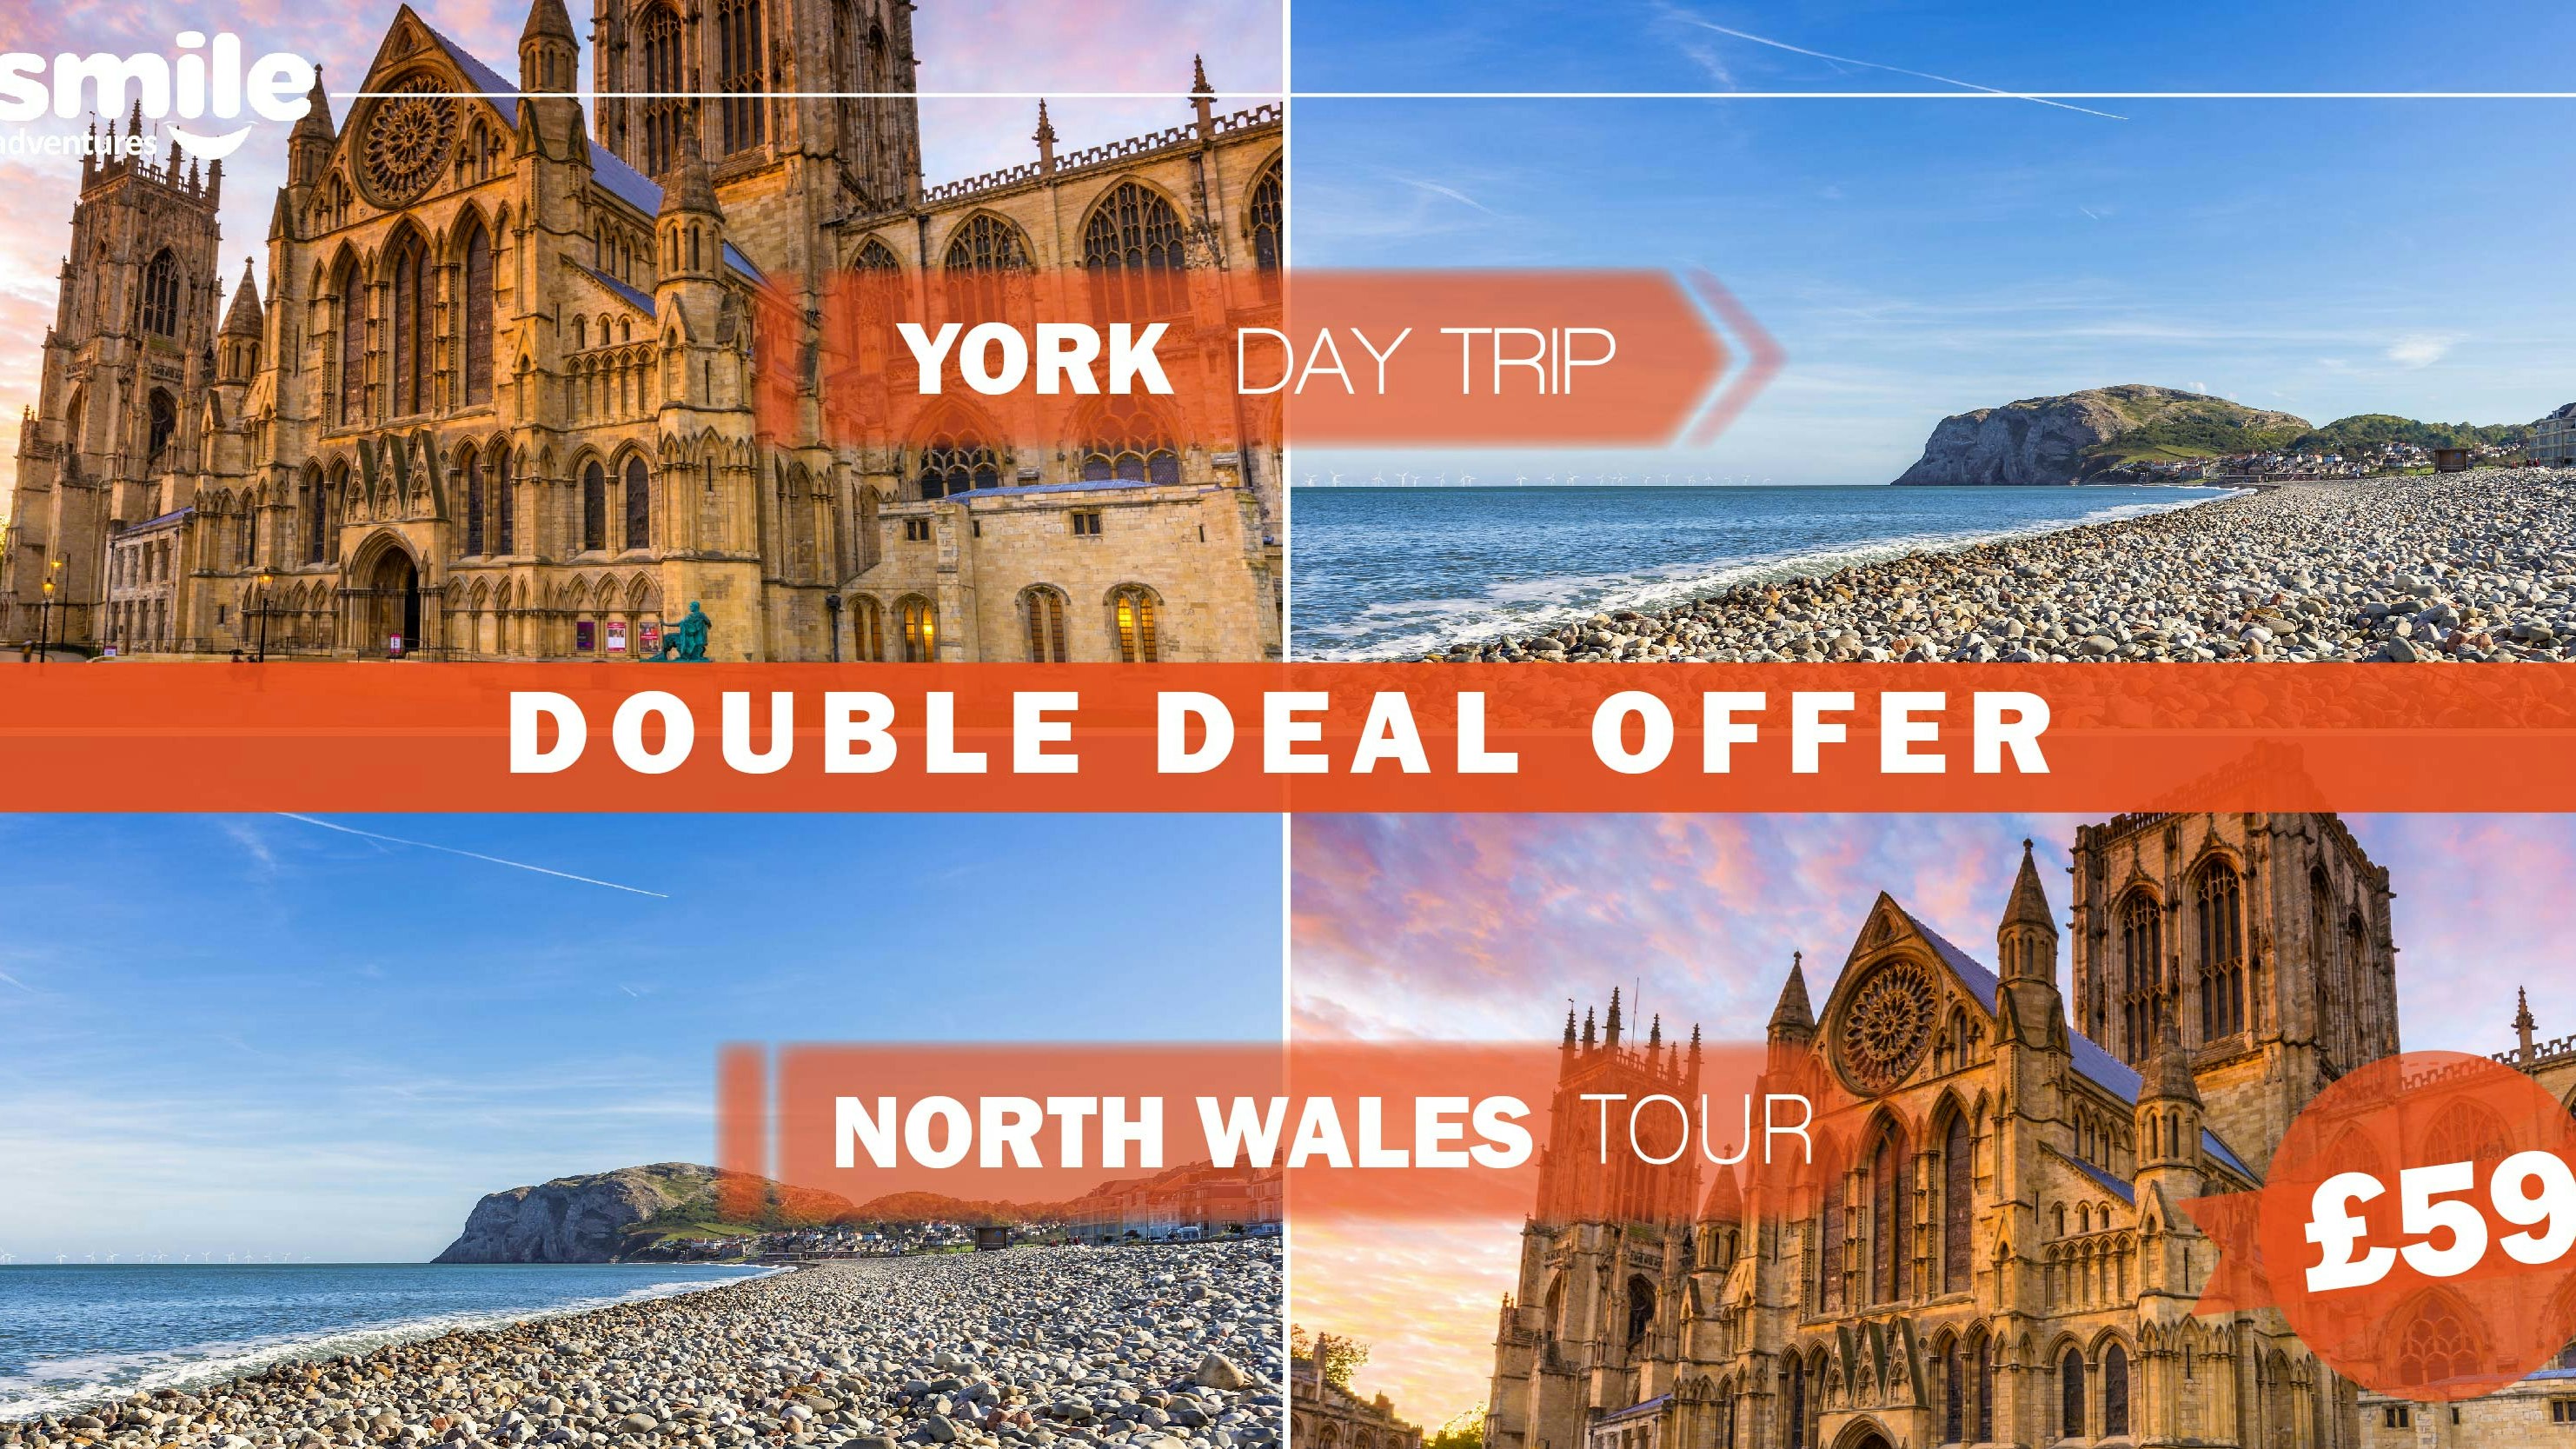 DOUBLE DEAL – York Day Trip 21.05.2022 / North Wales Tour 22.05.2022